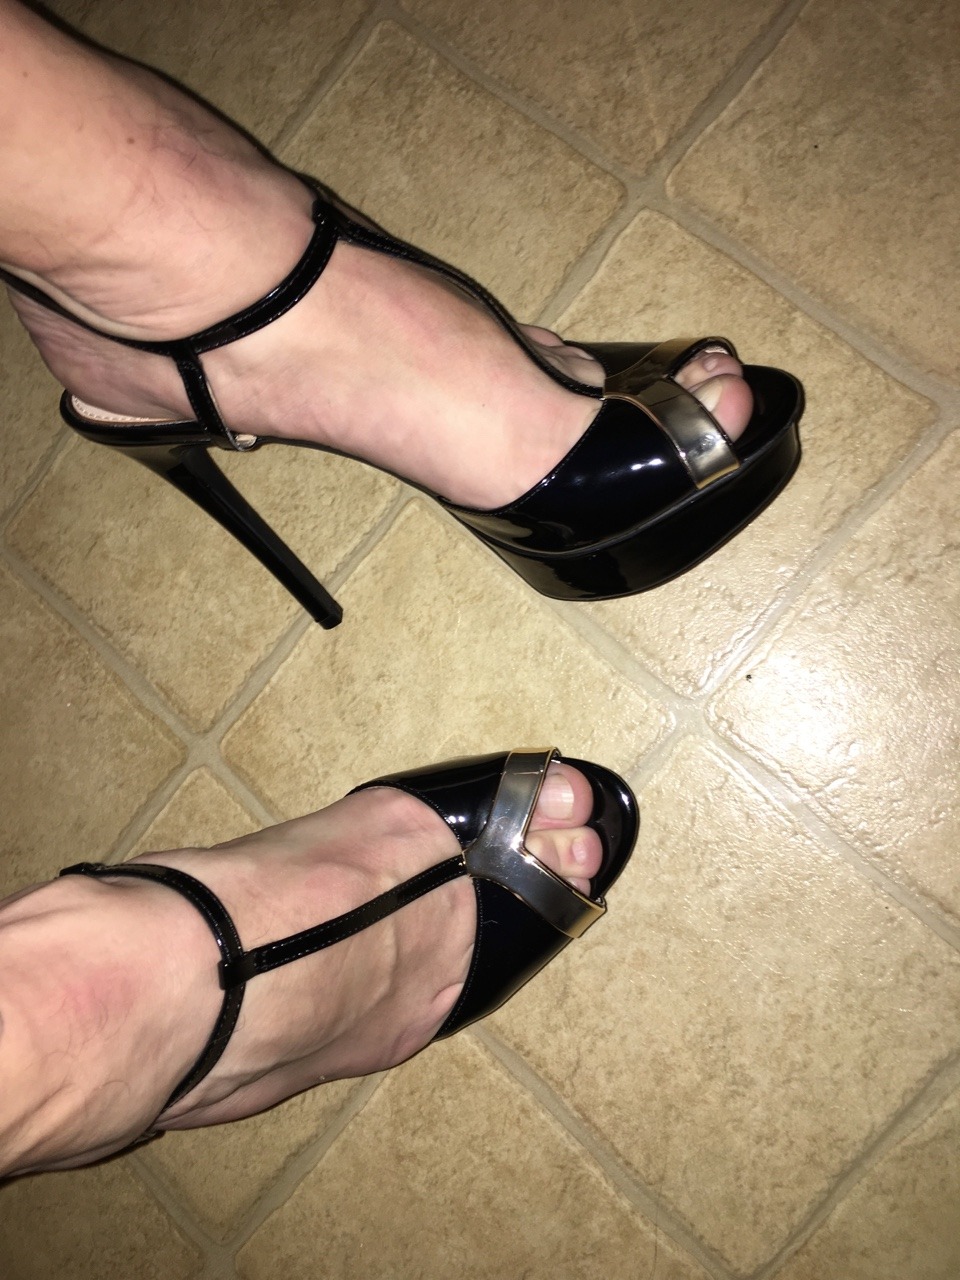 Love my new slut shoes  What color nail polish should I get ??  Yours truly sissy